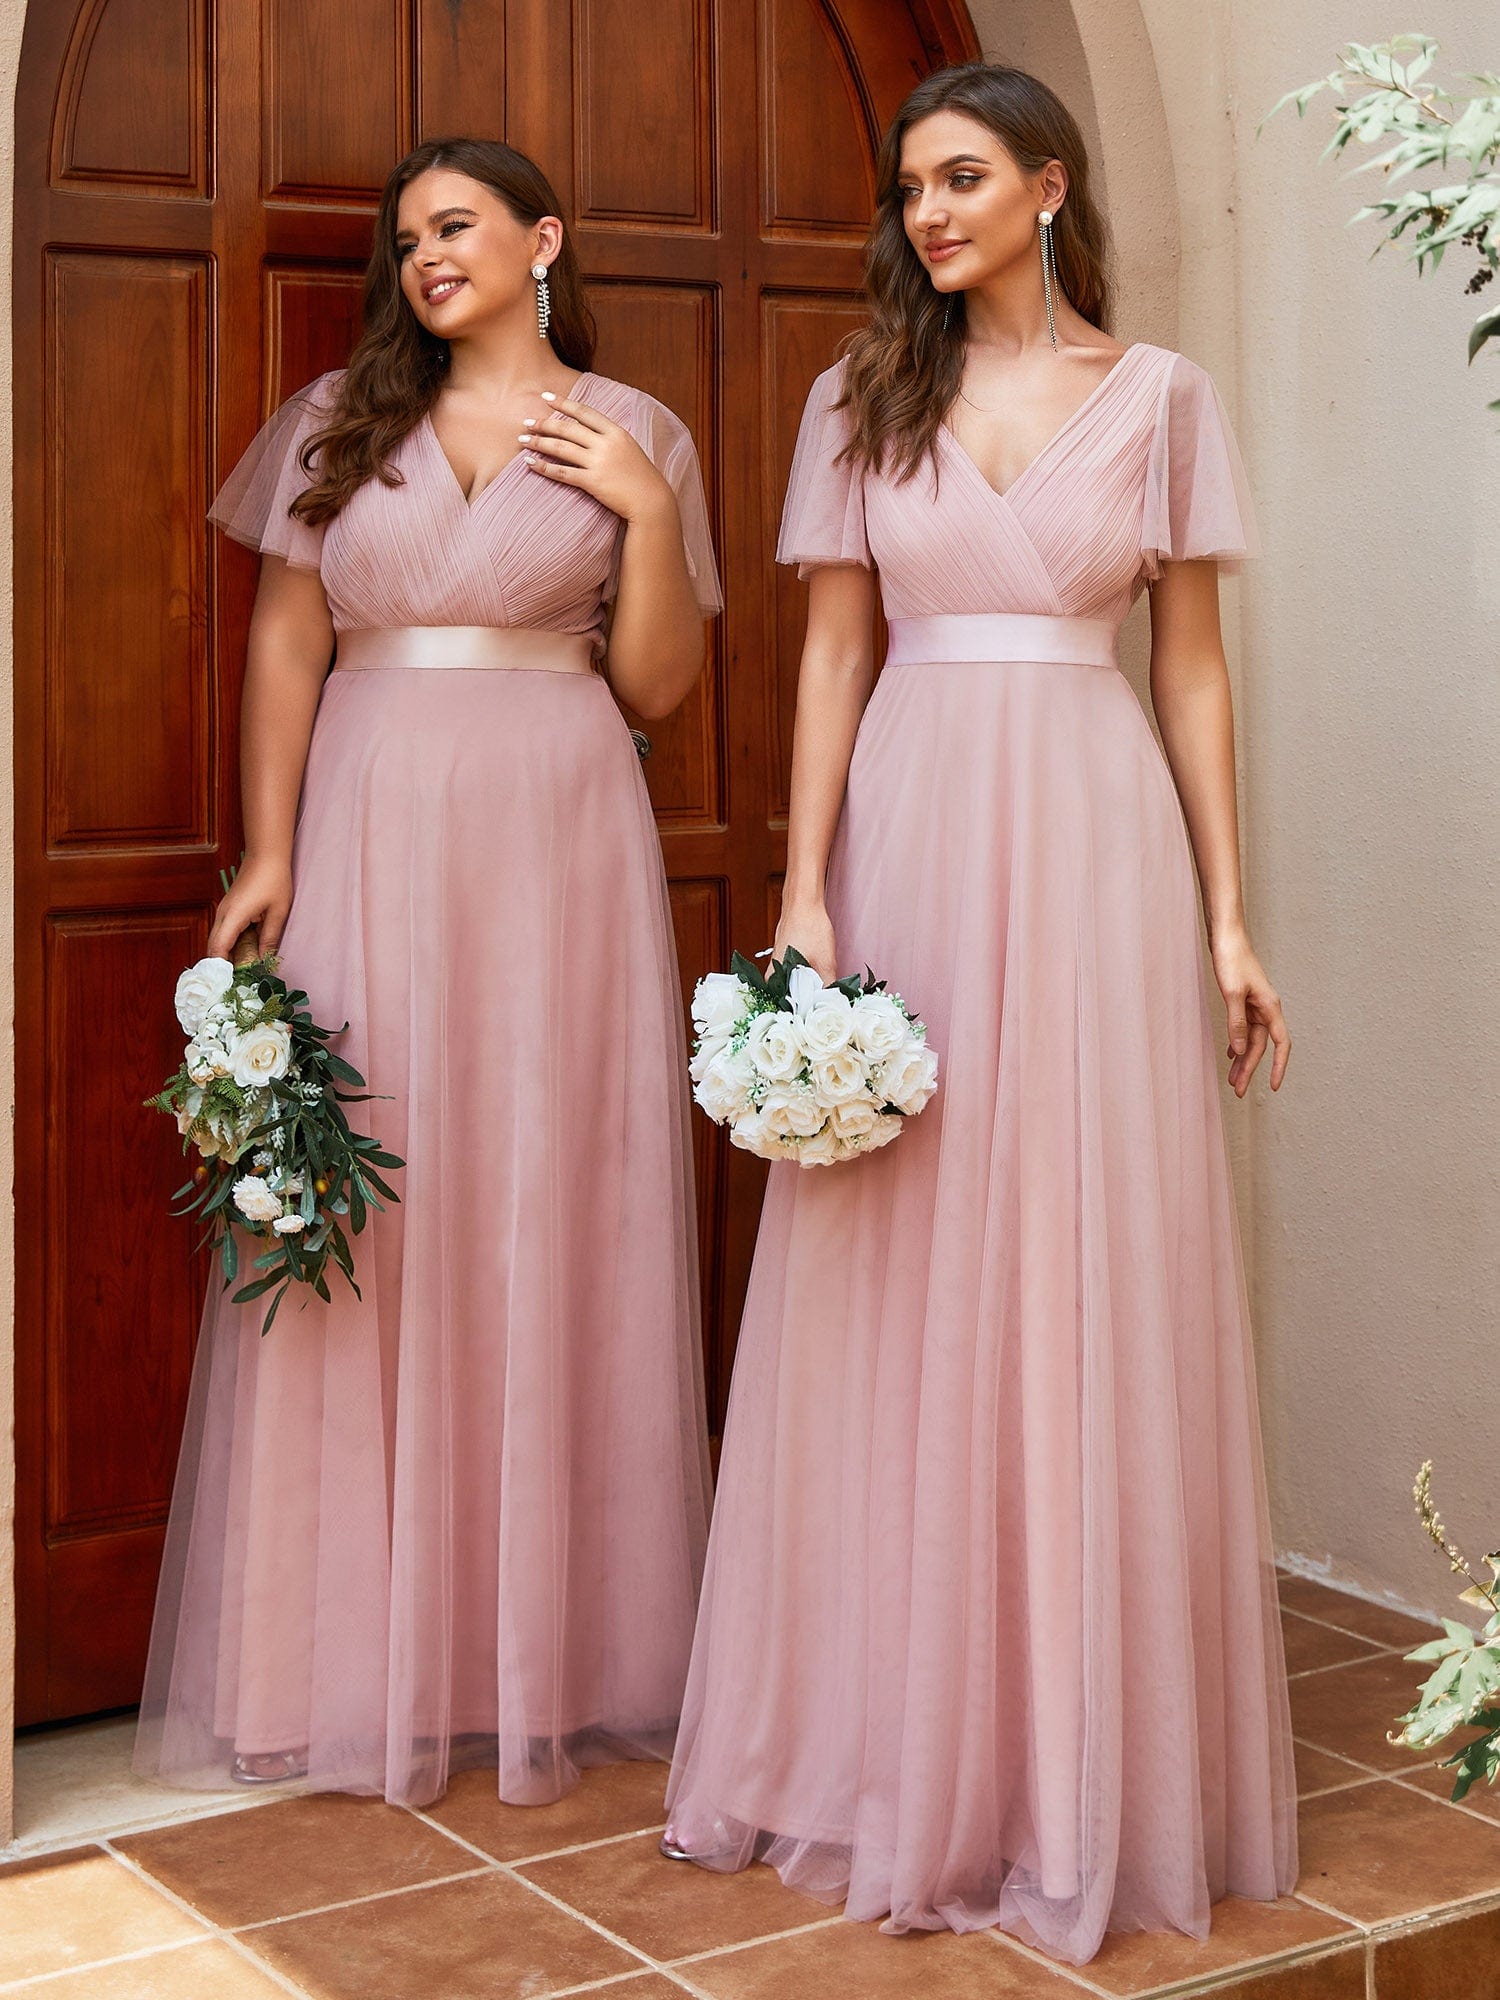 Dusty Pink Sequin Off Shoulder Gold Sequin Prom Dress With Beaded Detailing  Floor Length A Line Evening Gown For Formal Parties And Events From  Fittedbridal, $132.87 | DHgate.Com